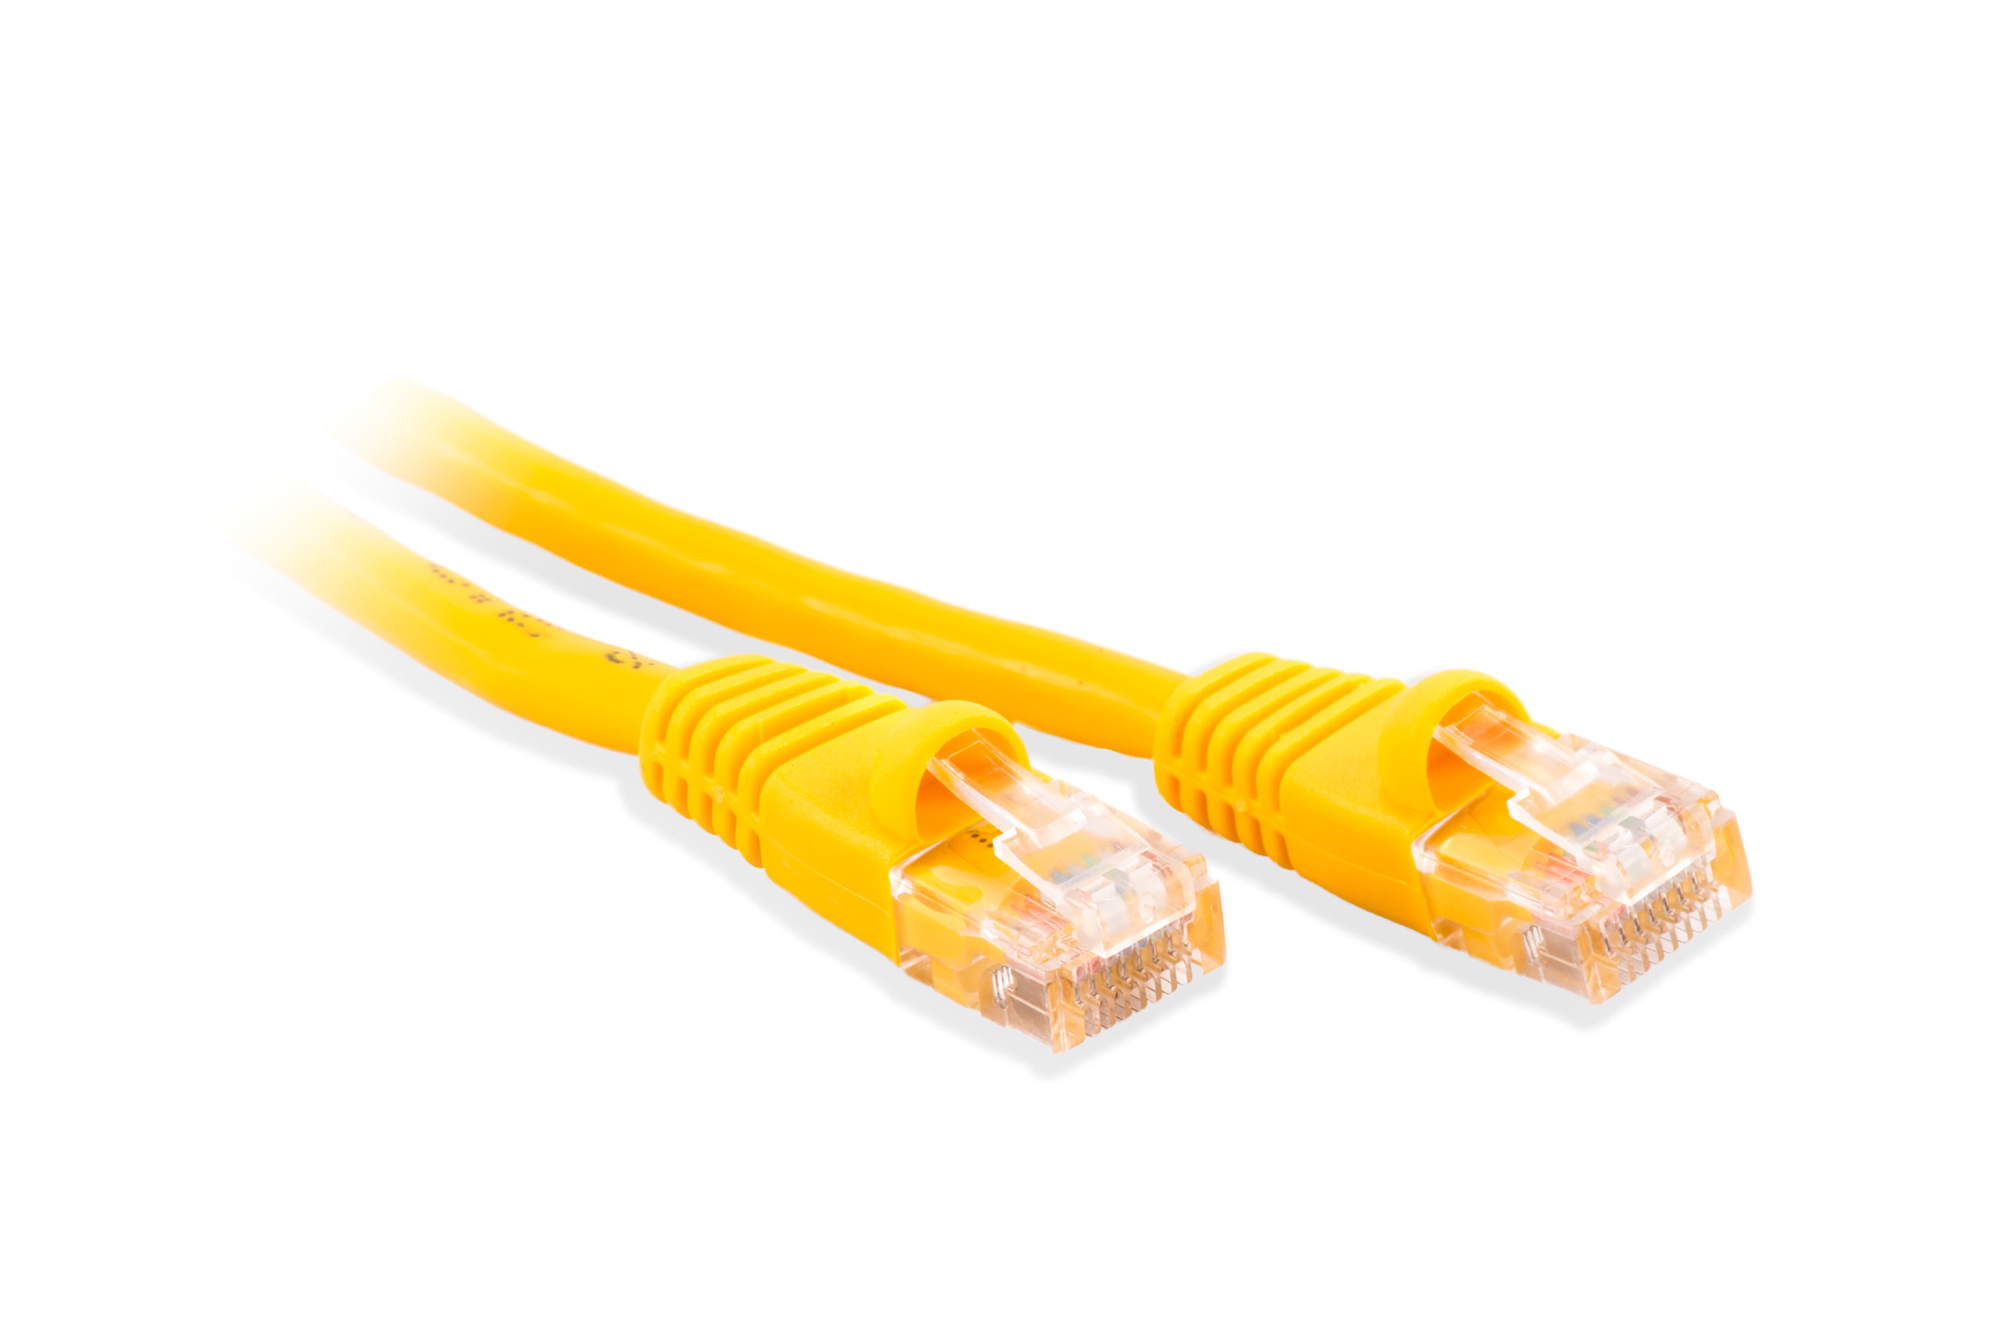 50ft Cat5e Ethernet Patch Cable - Yellow Color - Snagless Boot, Stranded, RJ45, 350Mhz, 24AWG